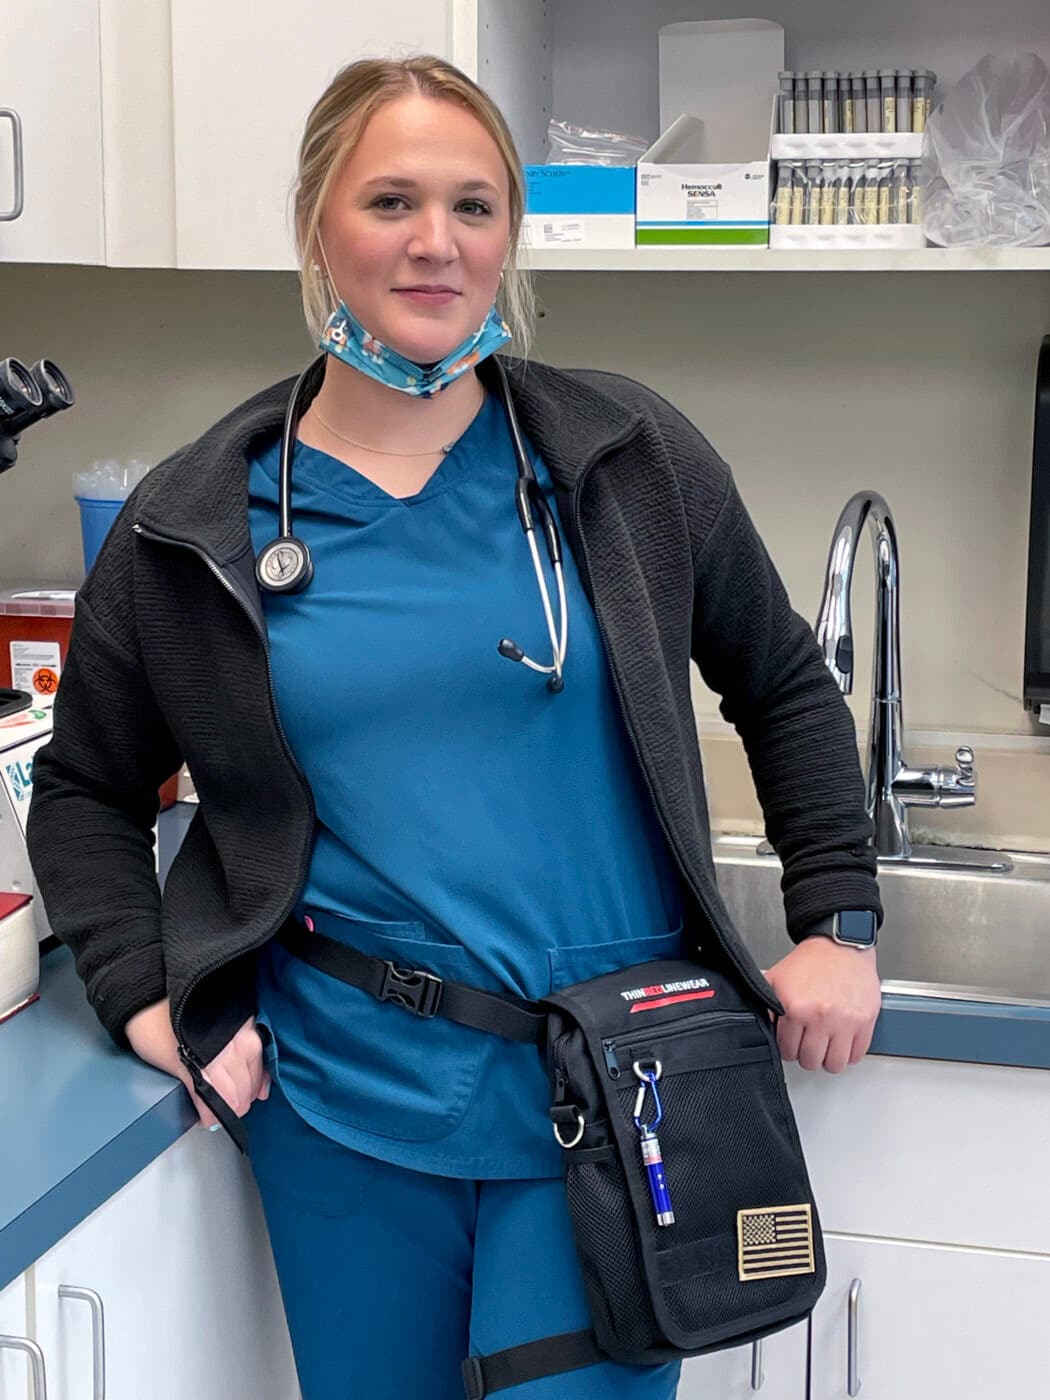 Nurse with Thin Red Line Wear bag at her waist